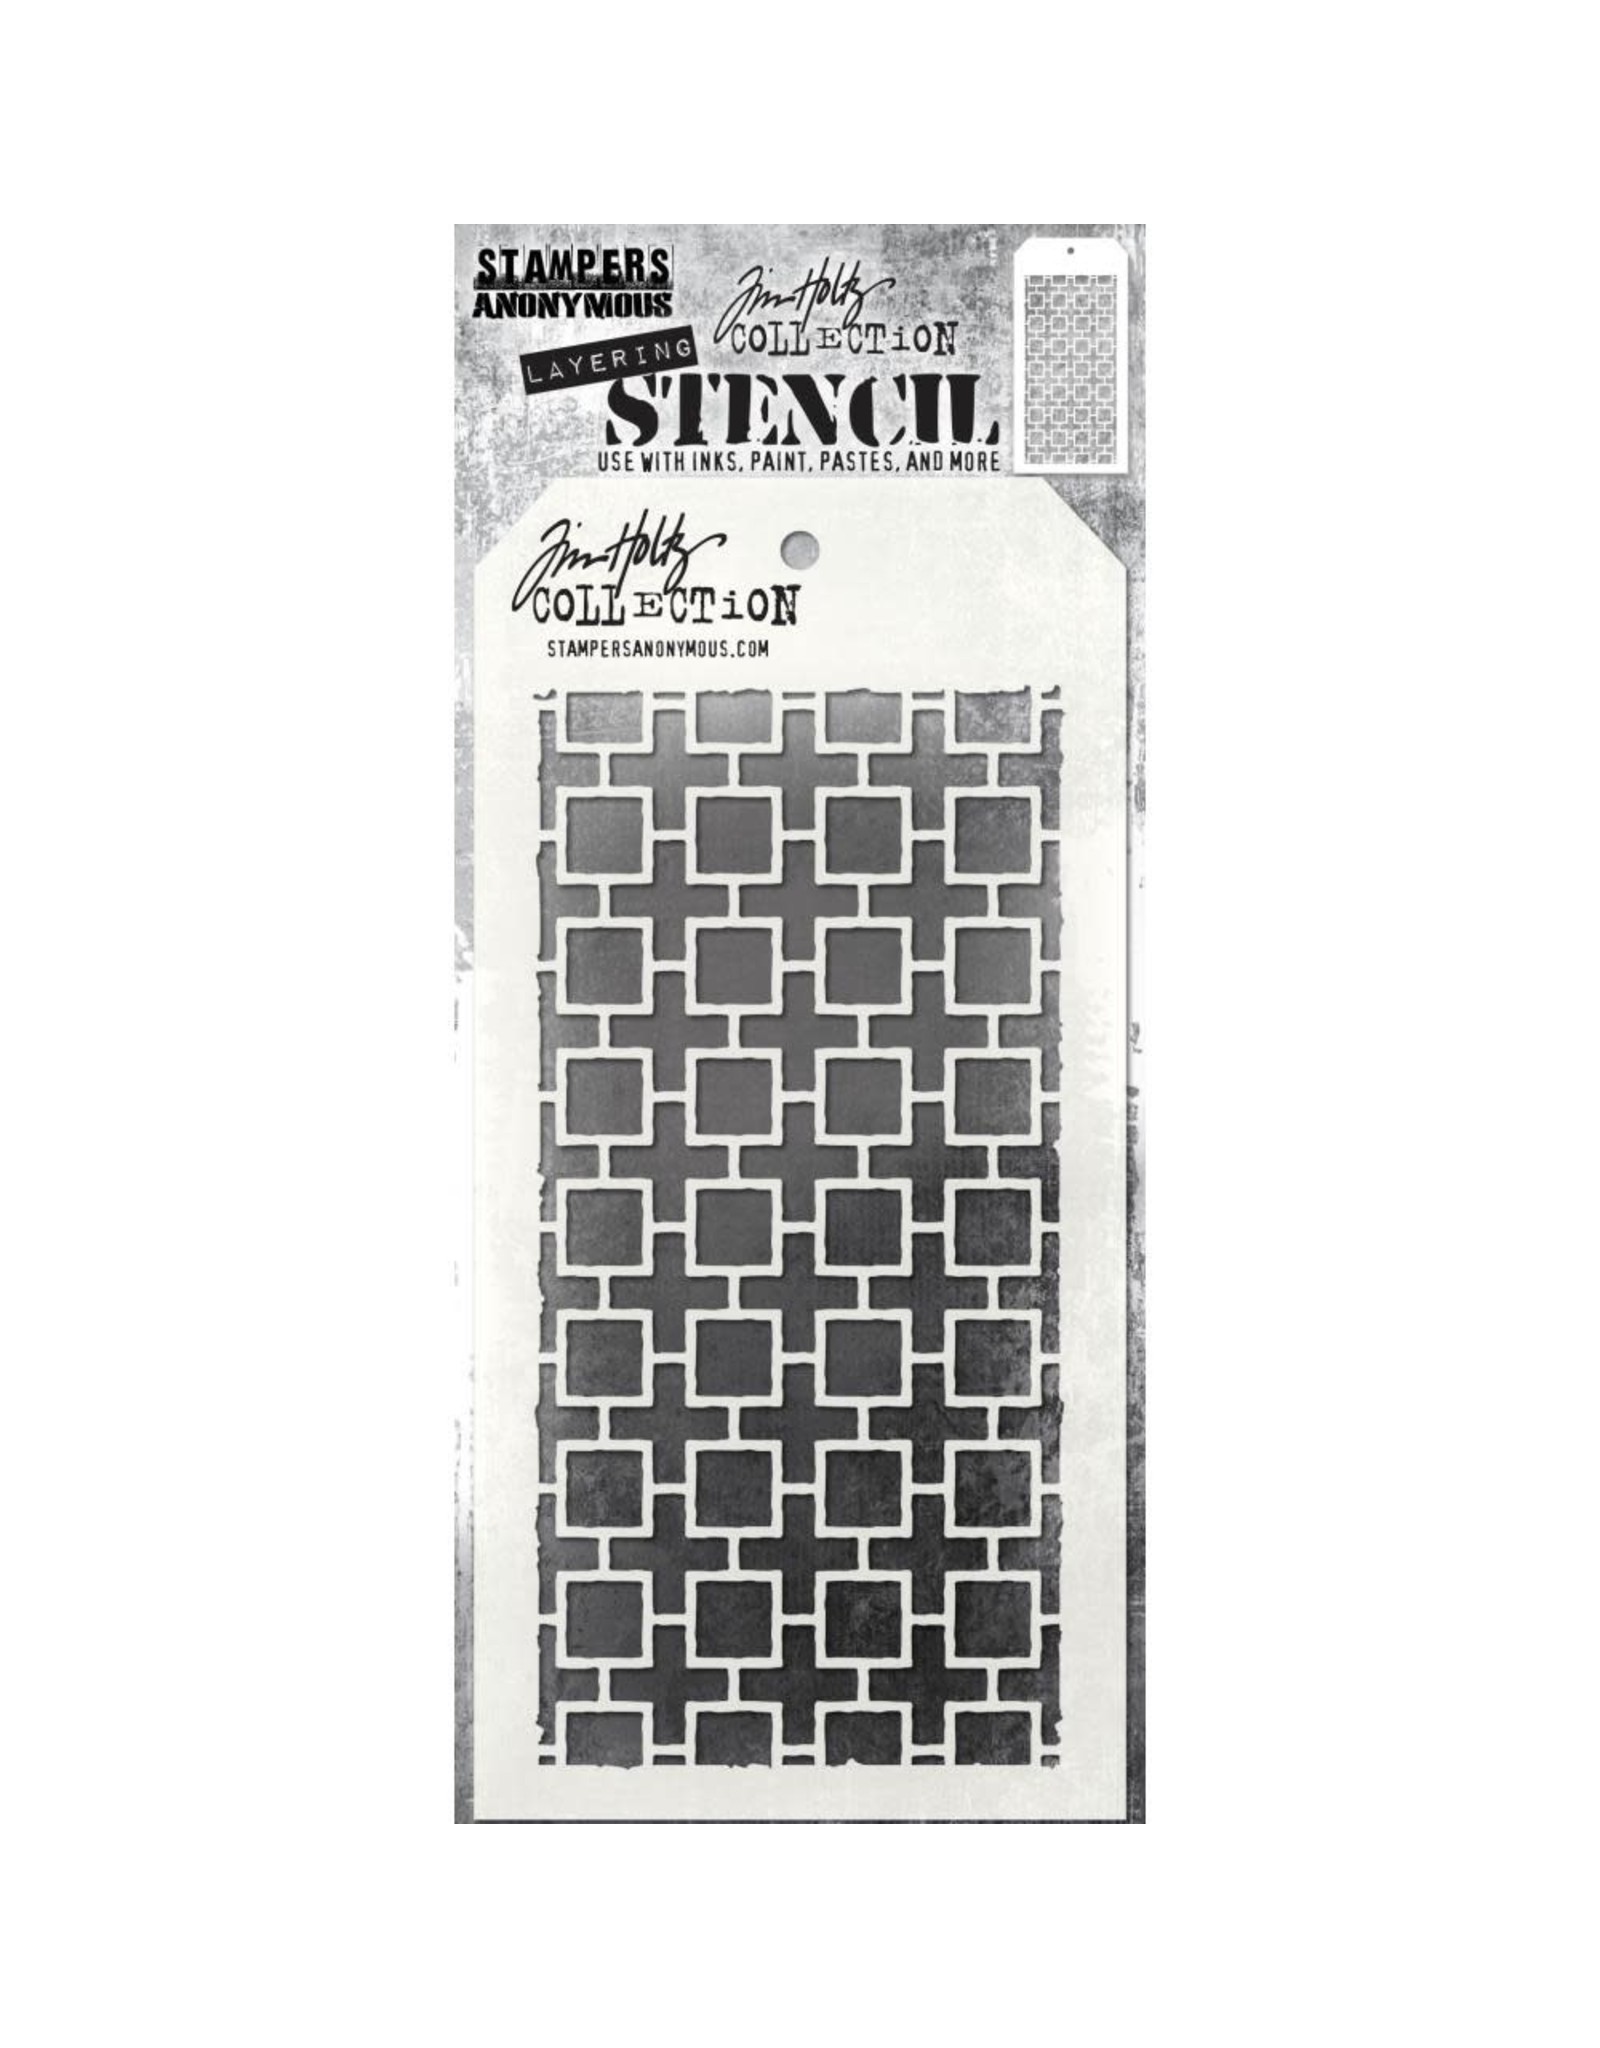 Tim Holtz - Stampers Anonymous Linked Squared Layered Stencil